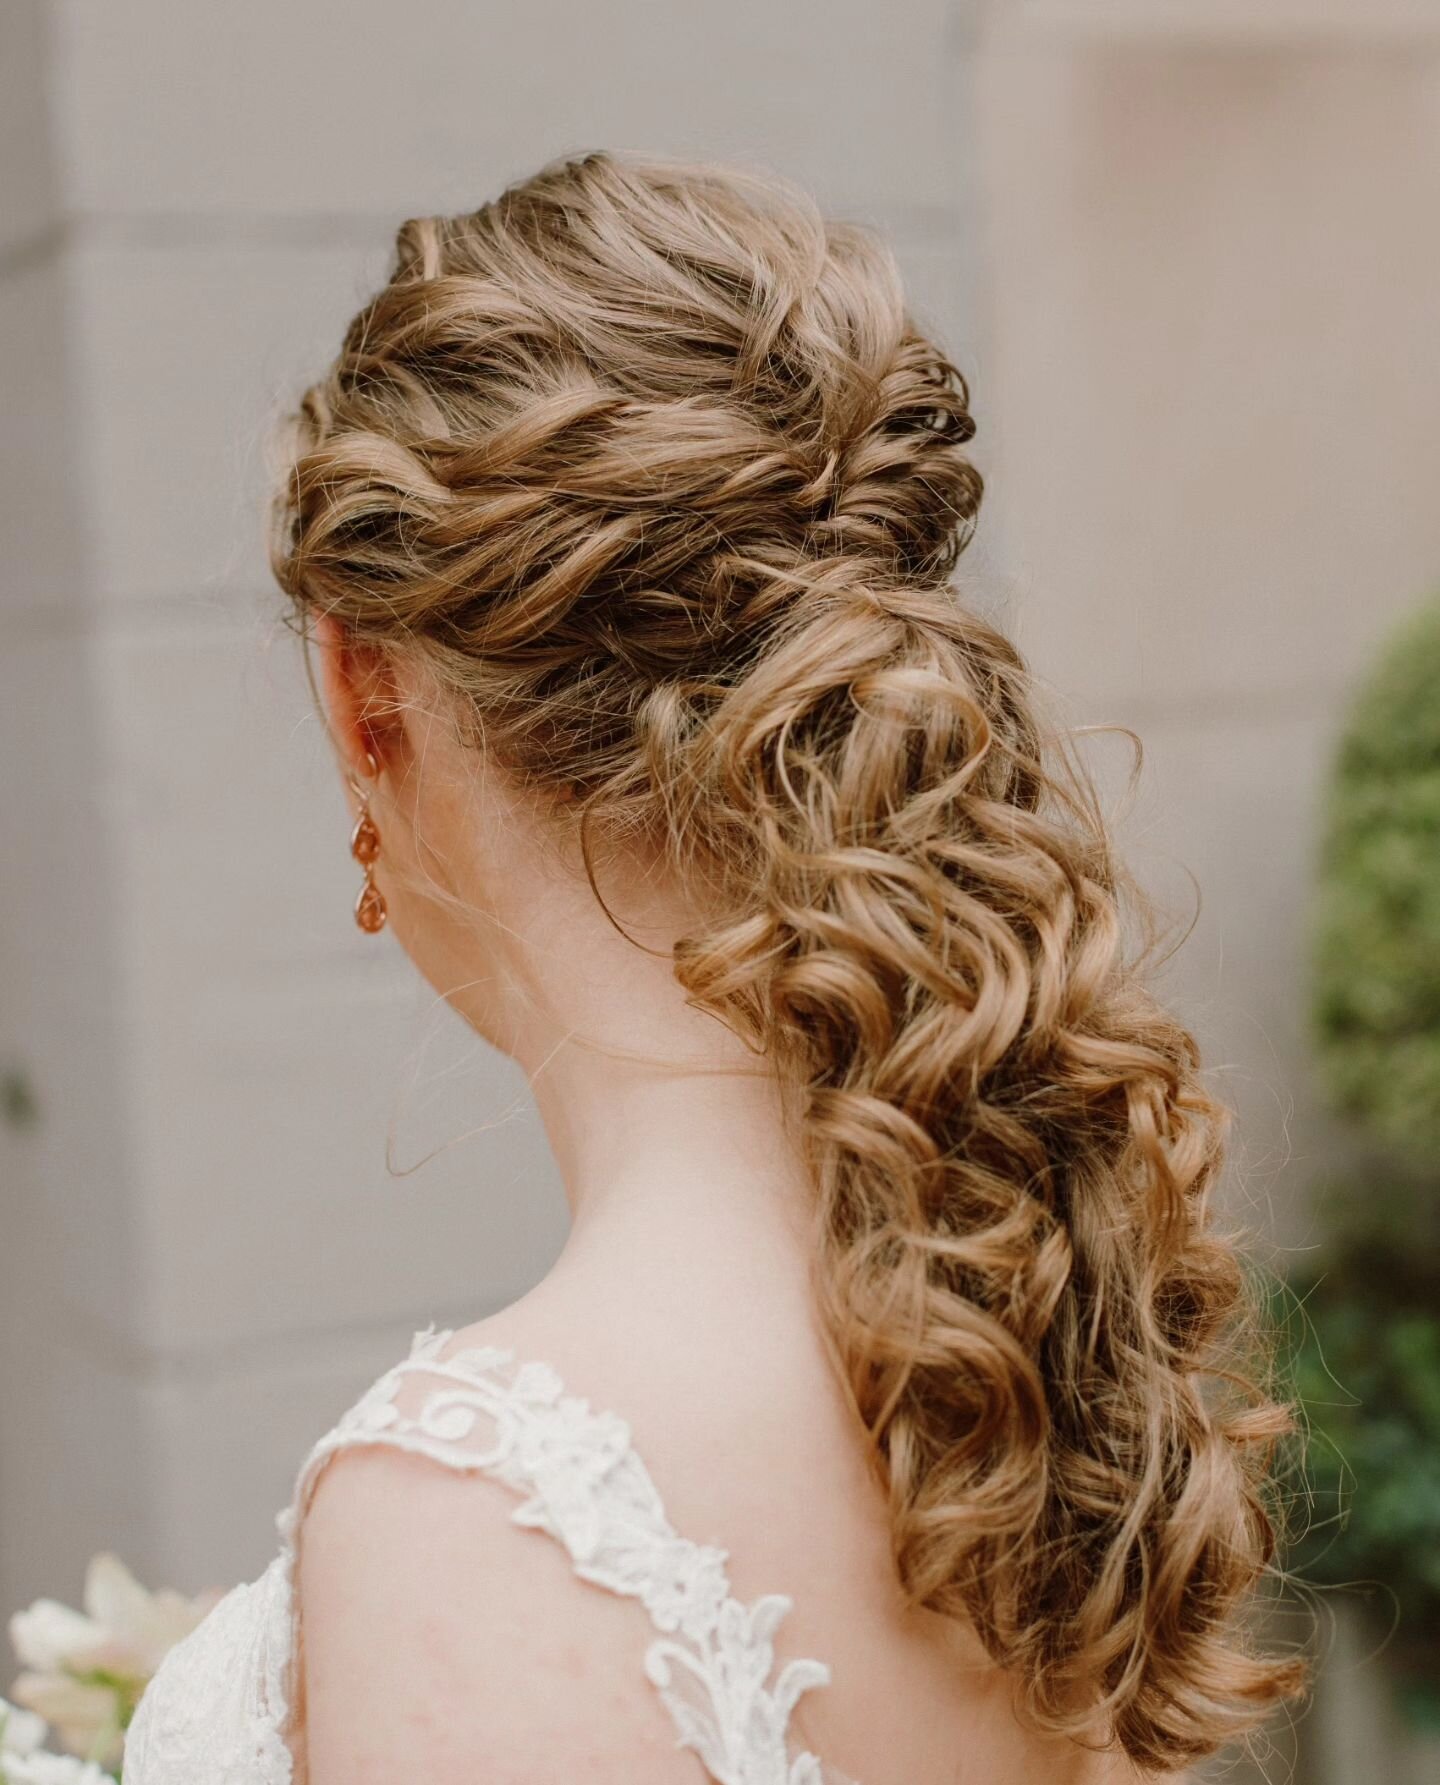 Bridal Ponytails are forever my favorite 🩷
.
Curly hair, waves, or sleek strands, I love a ponytail. Stephanie's ponytail embraced her natural texture and complimented her open back gown. Making her bridal ponytail the perfect style for her.
.
Would